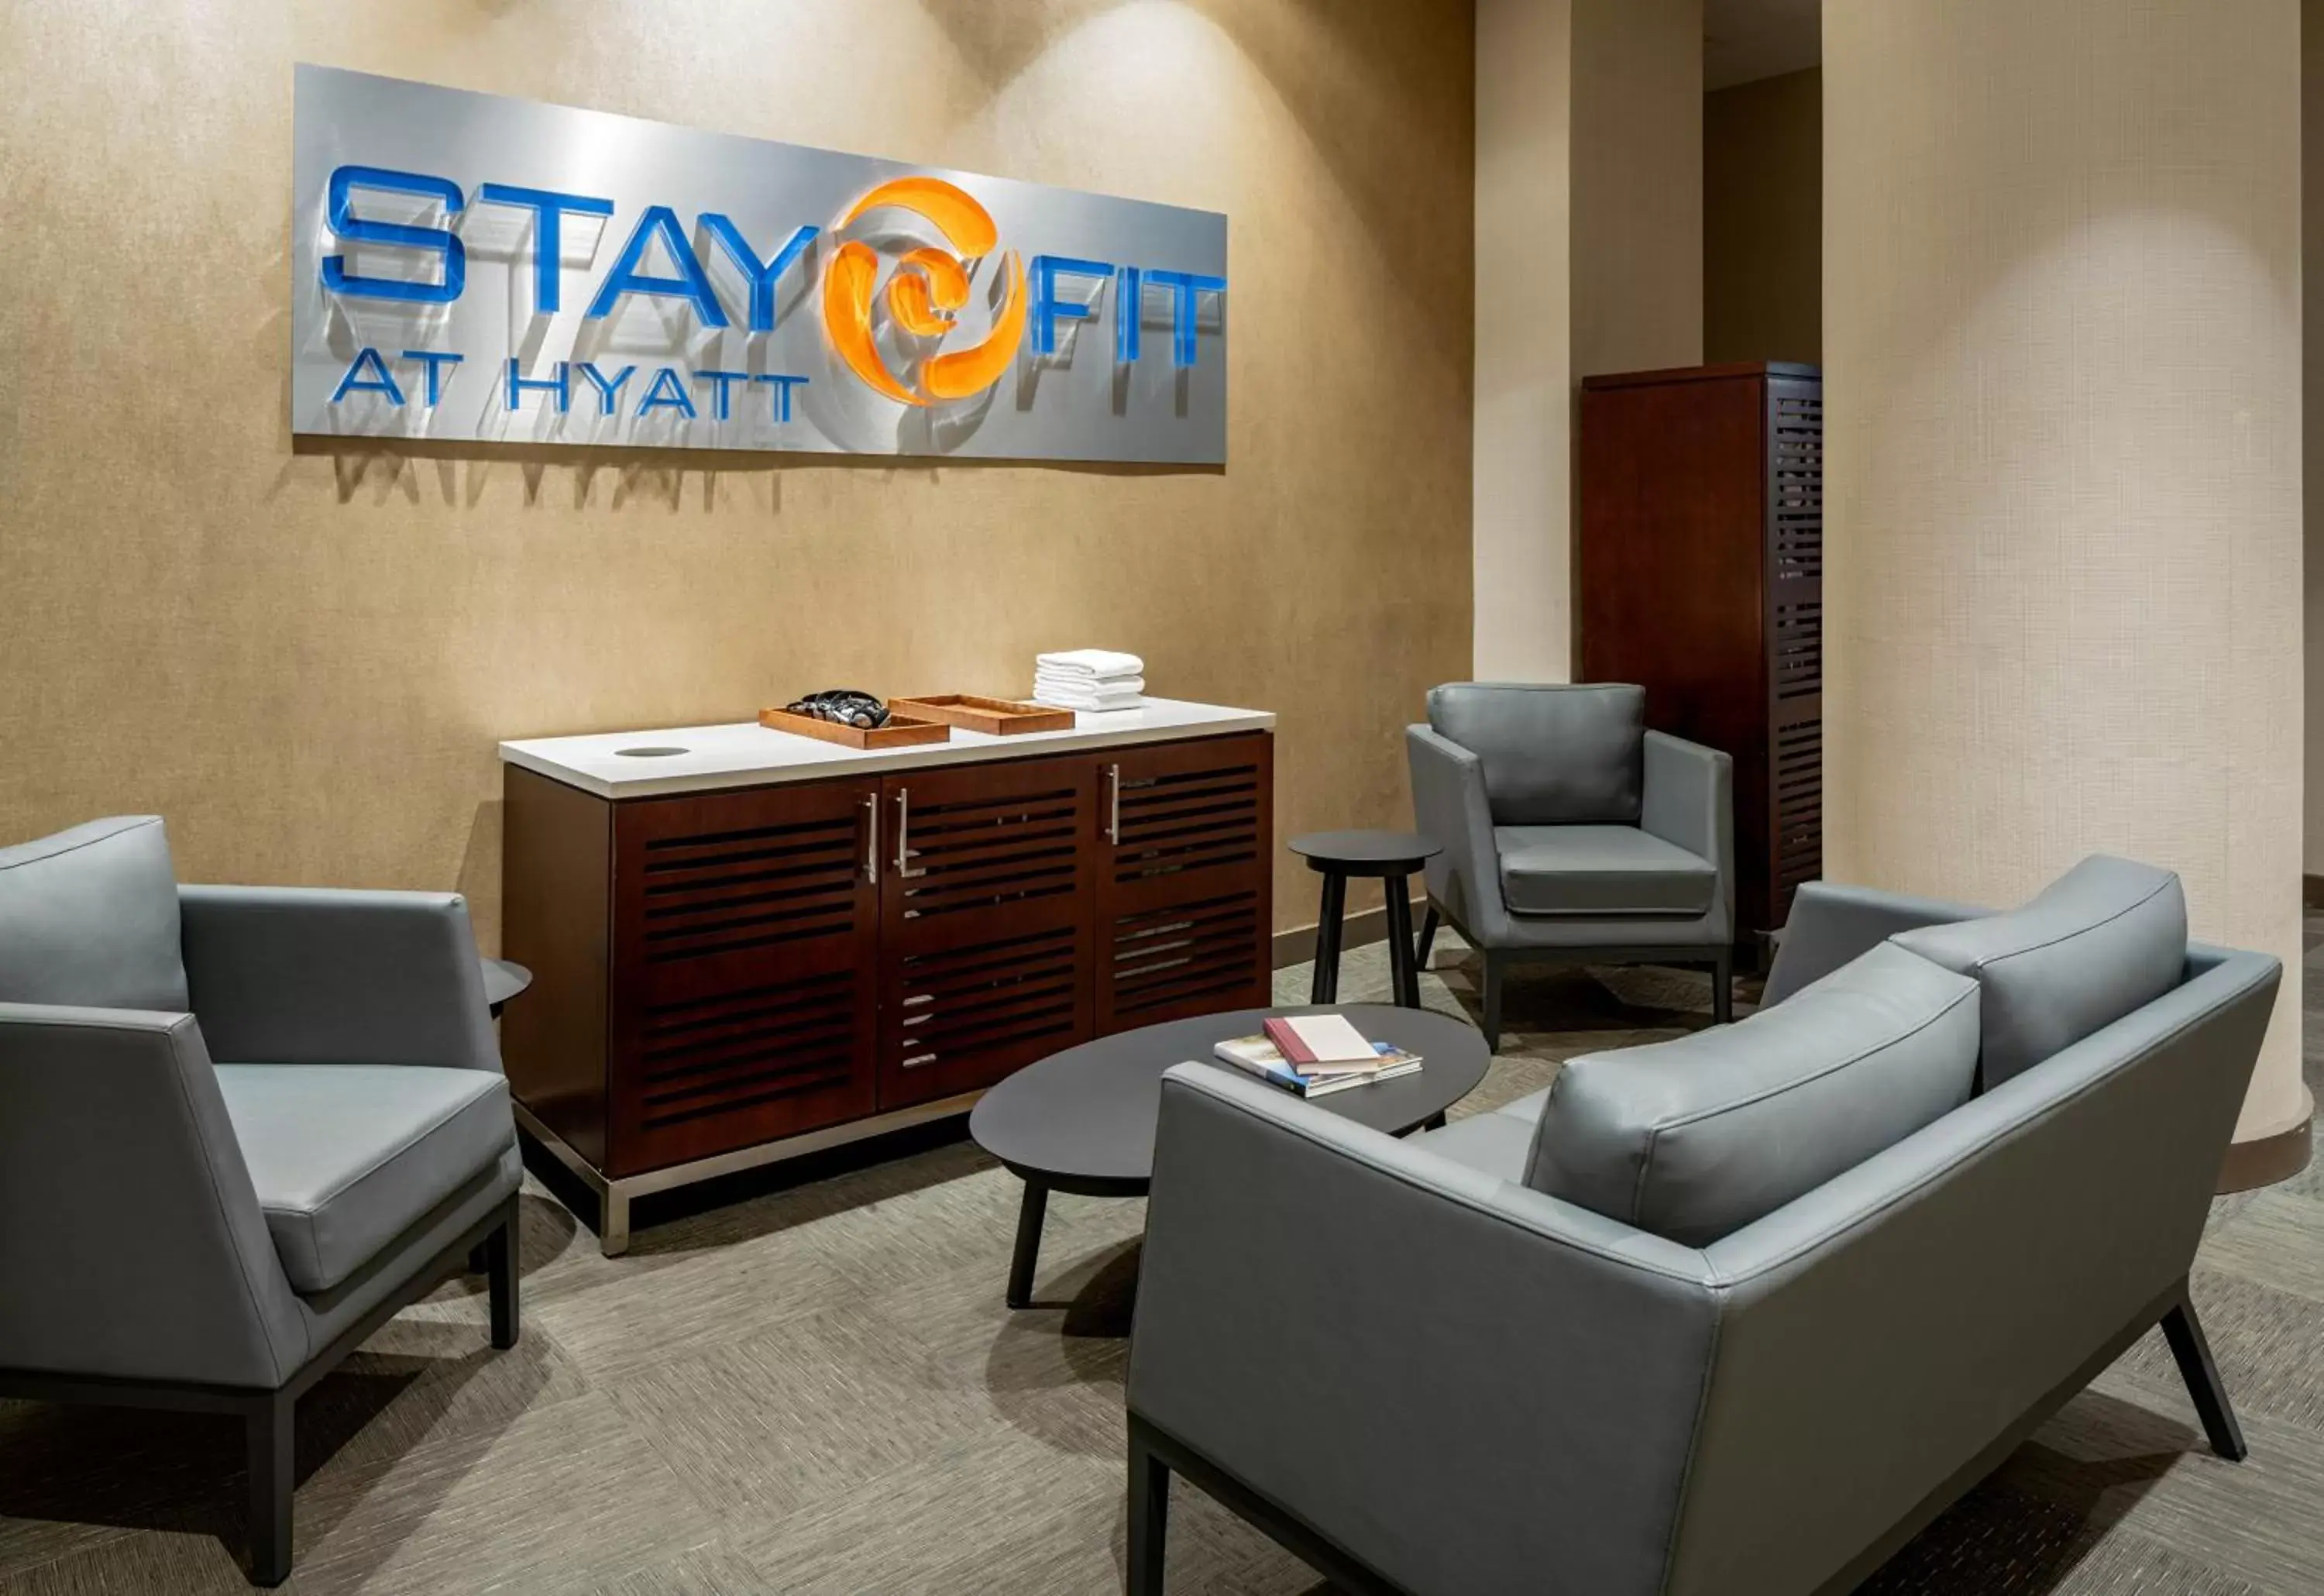 Fitness centre/facilities in Hyatt Regency Indianapolis at State Capitol